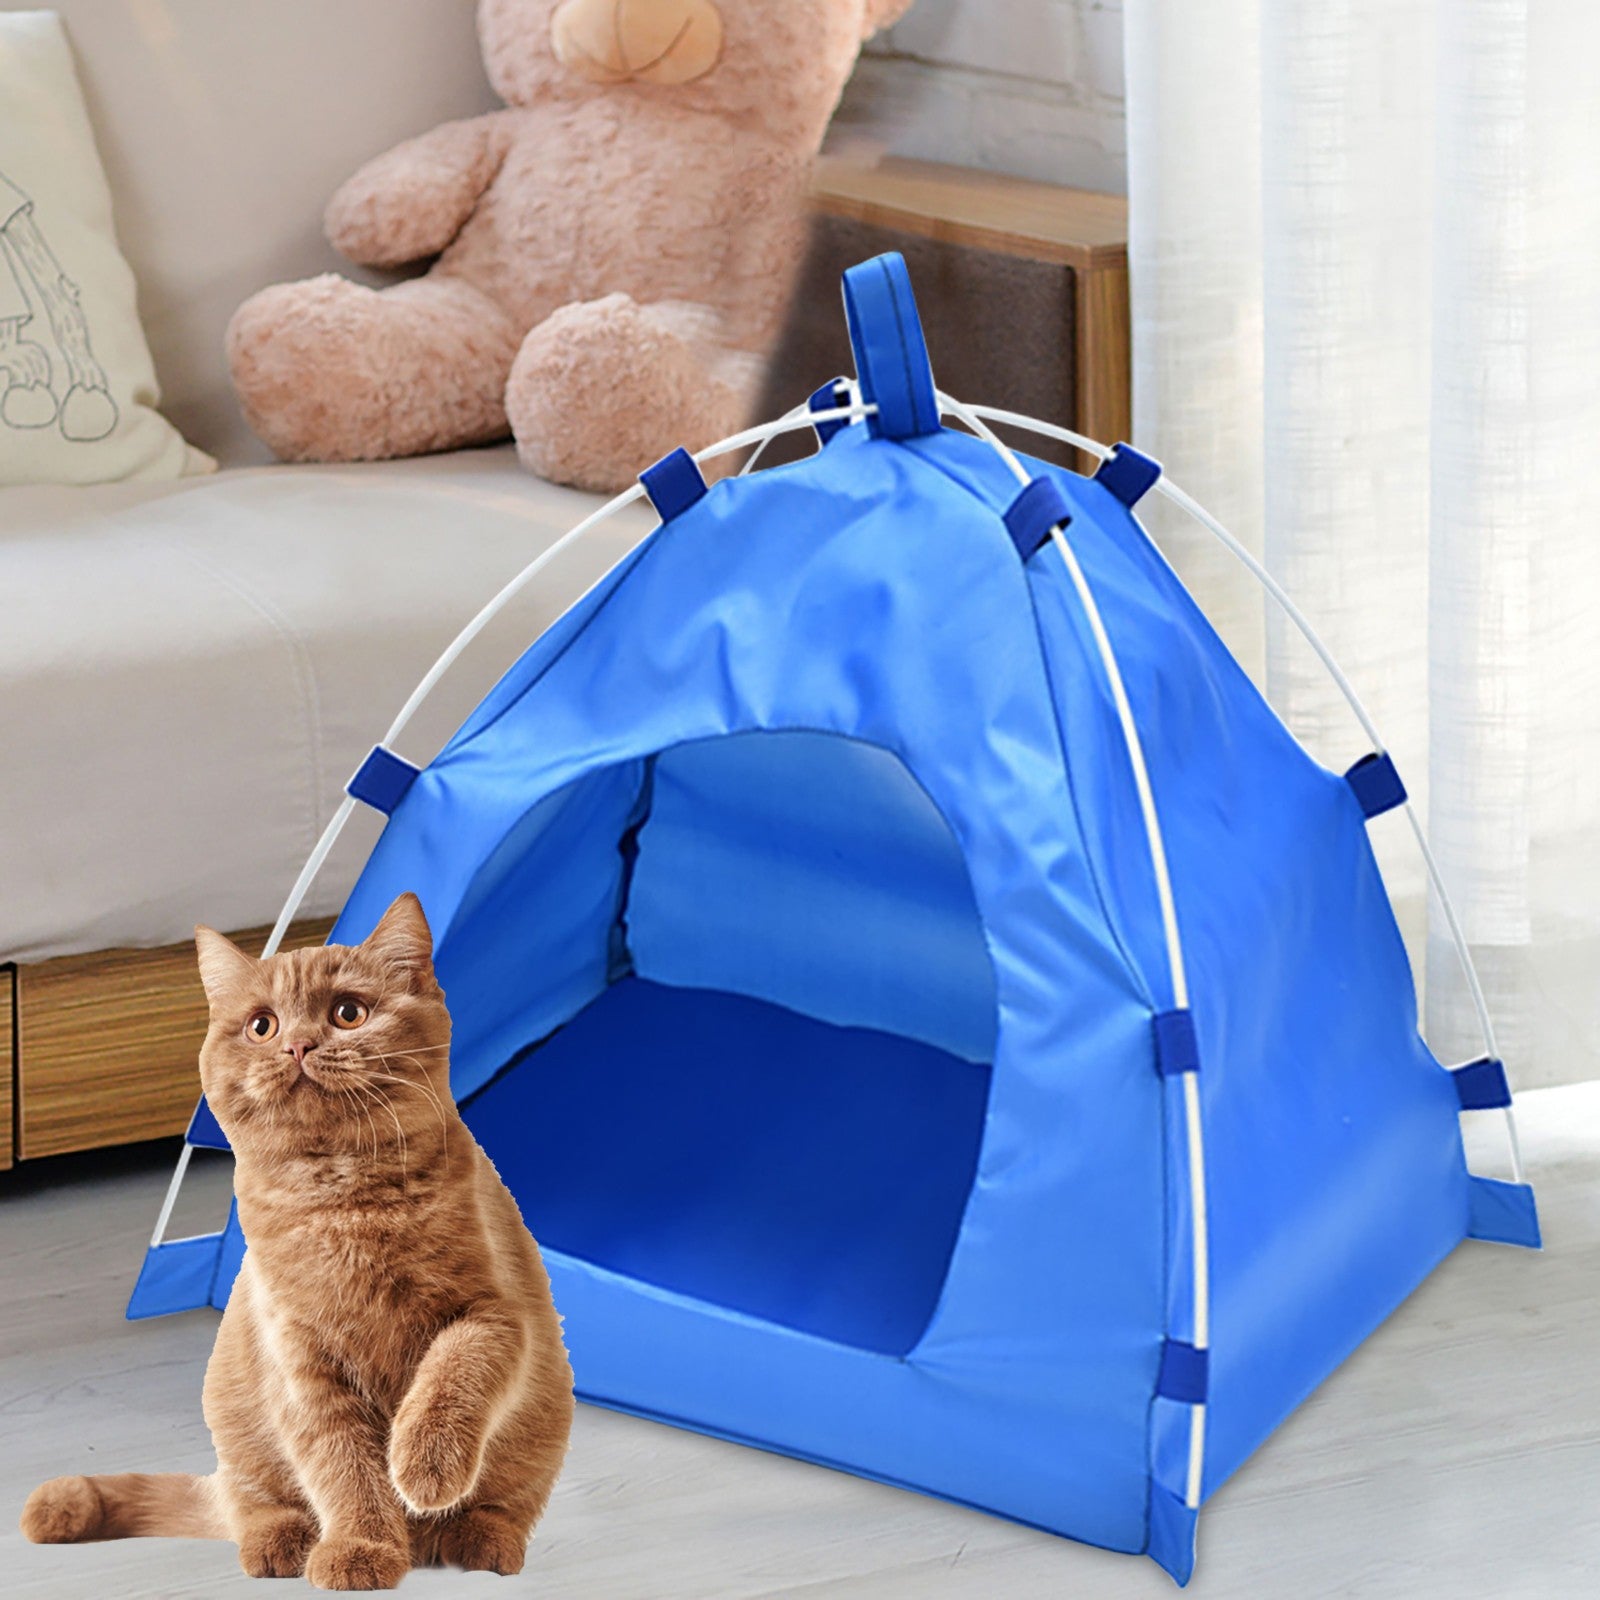 Breathable Washable Pet Puppy Kennel Dog Cat Folding Indoor Outdoor House Bed